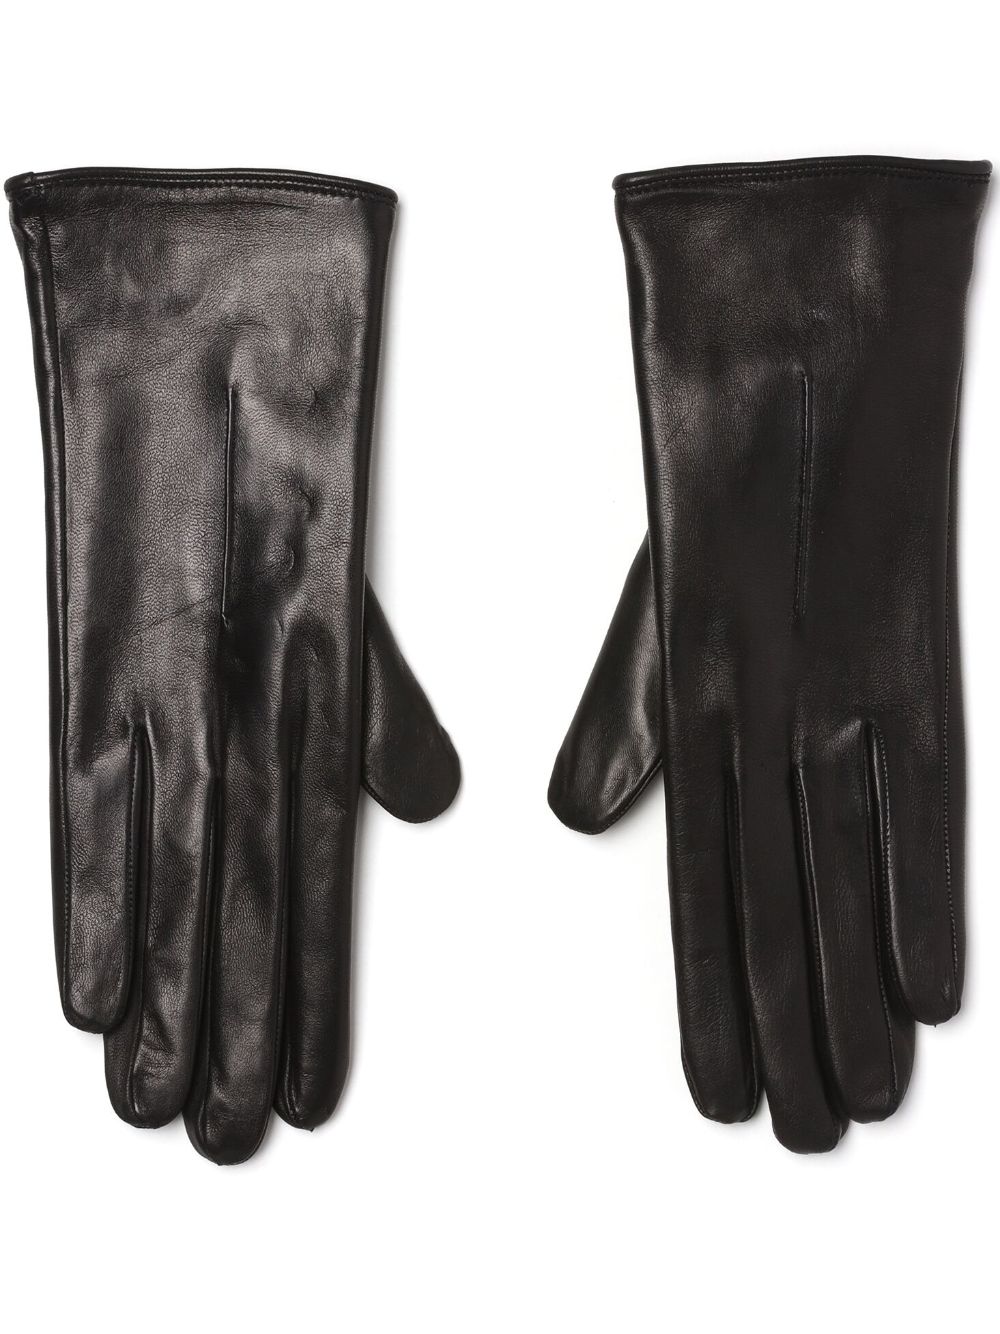 gusset-detail leather gloves